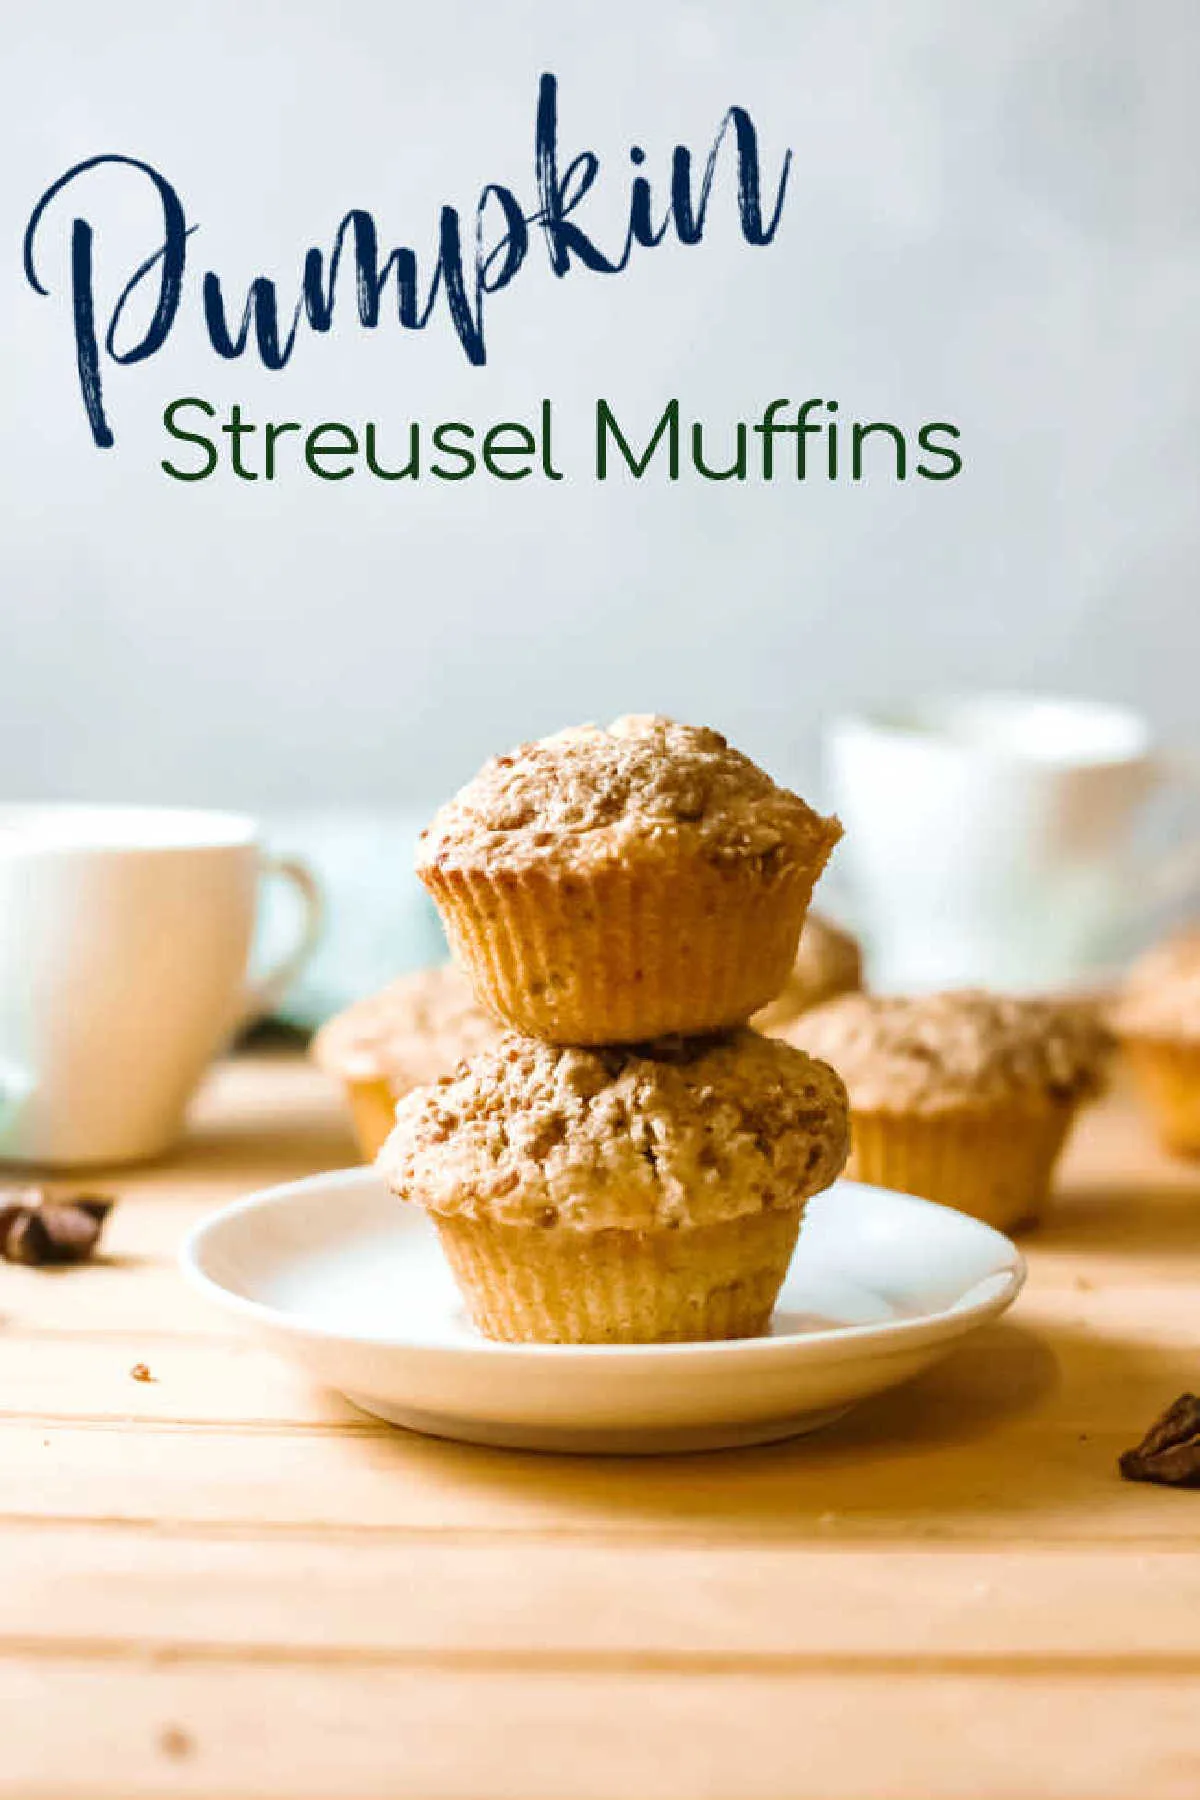 These yummy pumpkin muffins have a buttery streusel on top. They are a fabulous way to start your day and will go perfectly with your favorite fall coffees and teas.